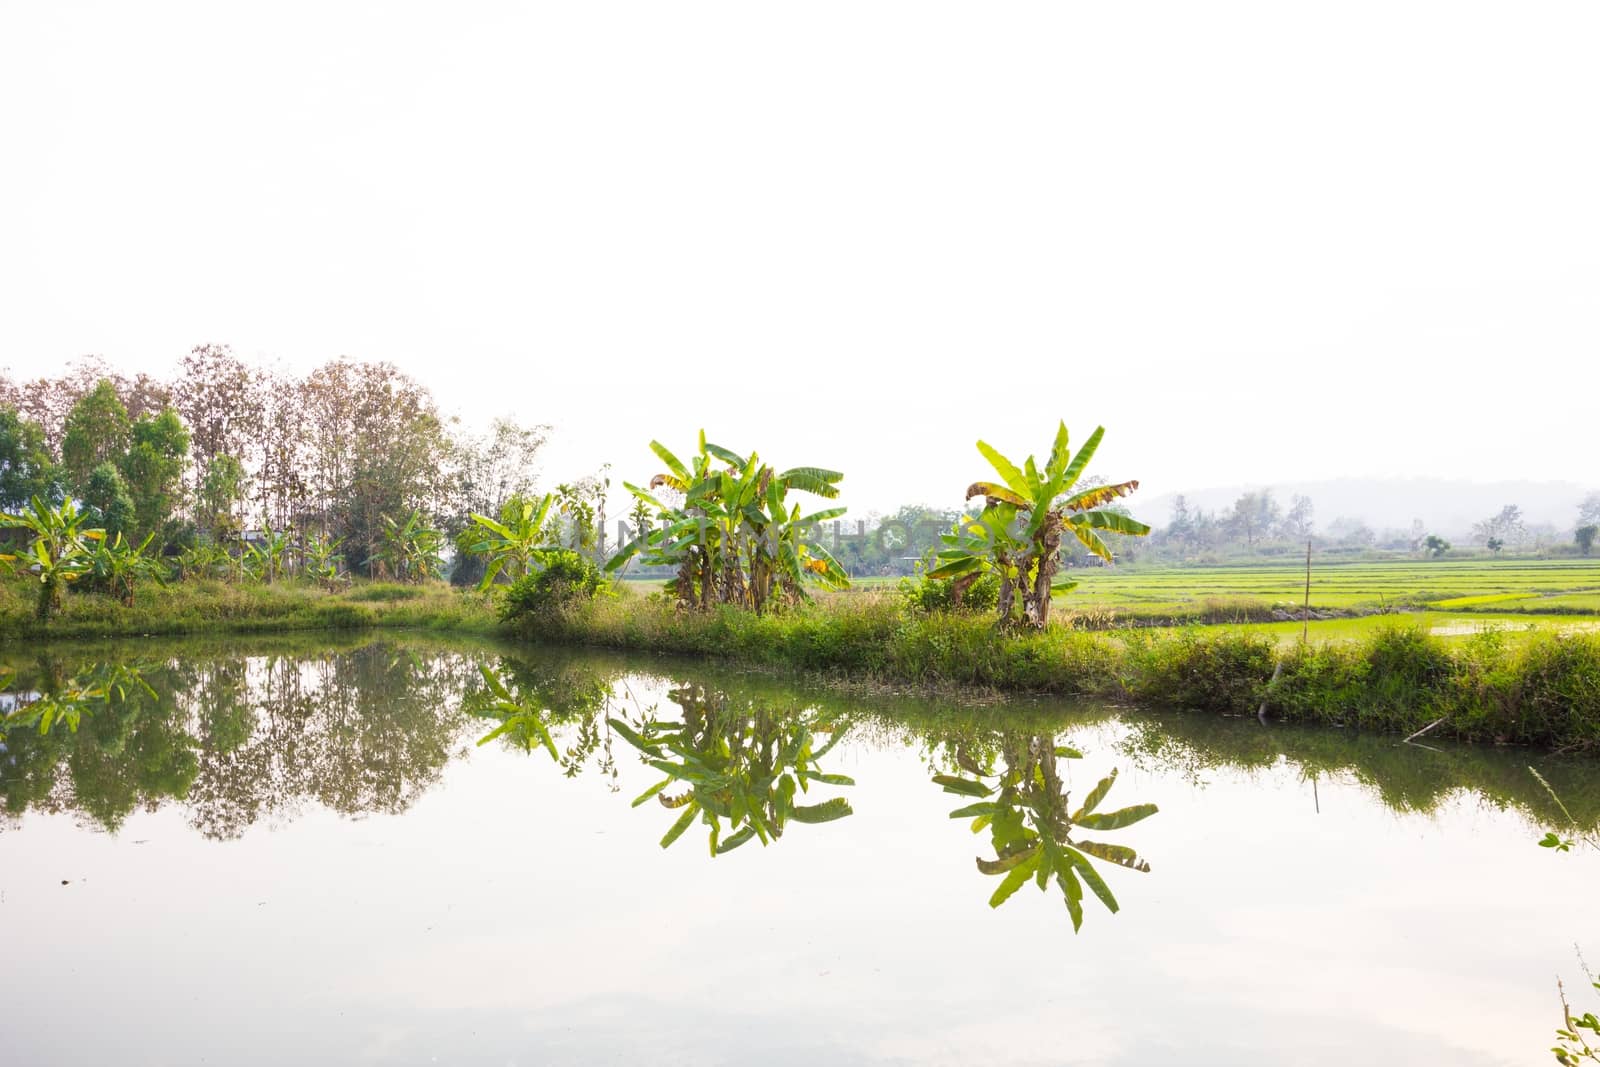 small lake near banana tree and rice field in Thailand, copyspace on top